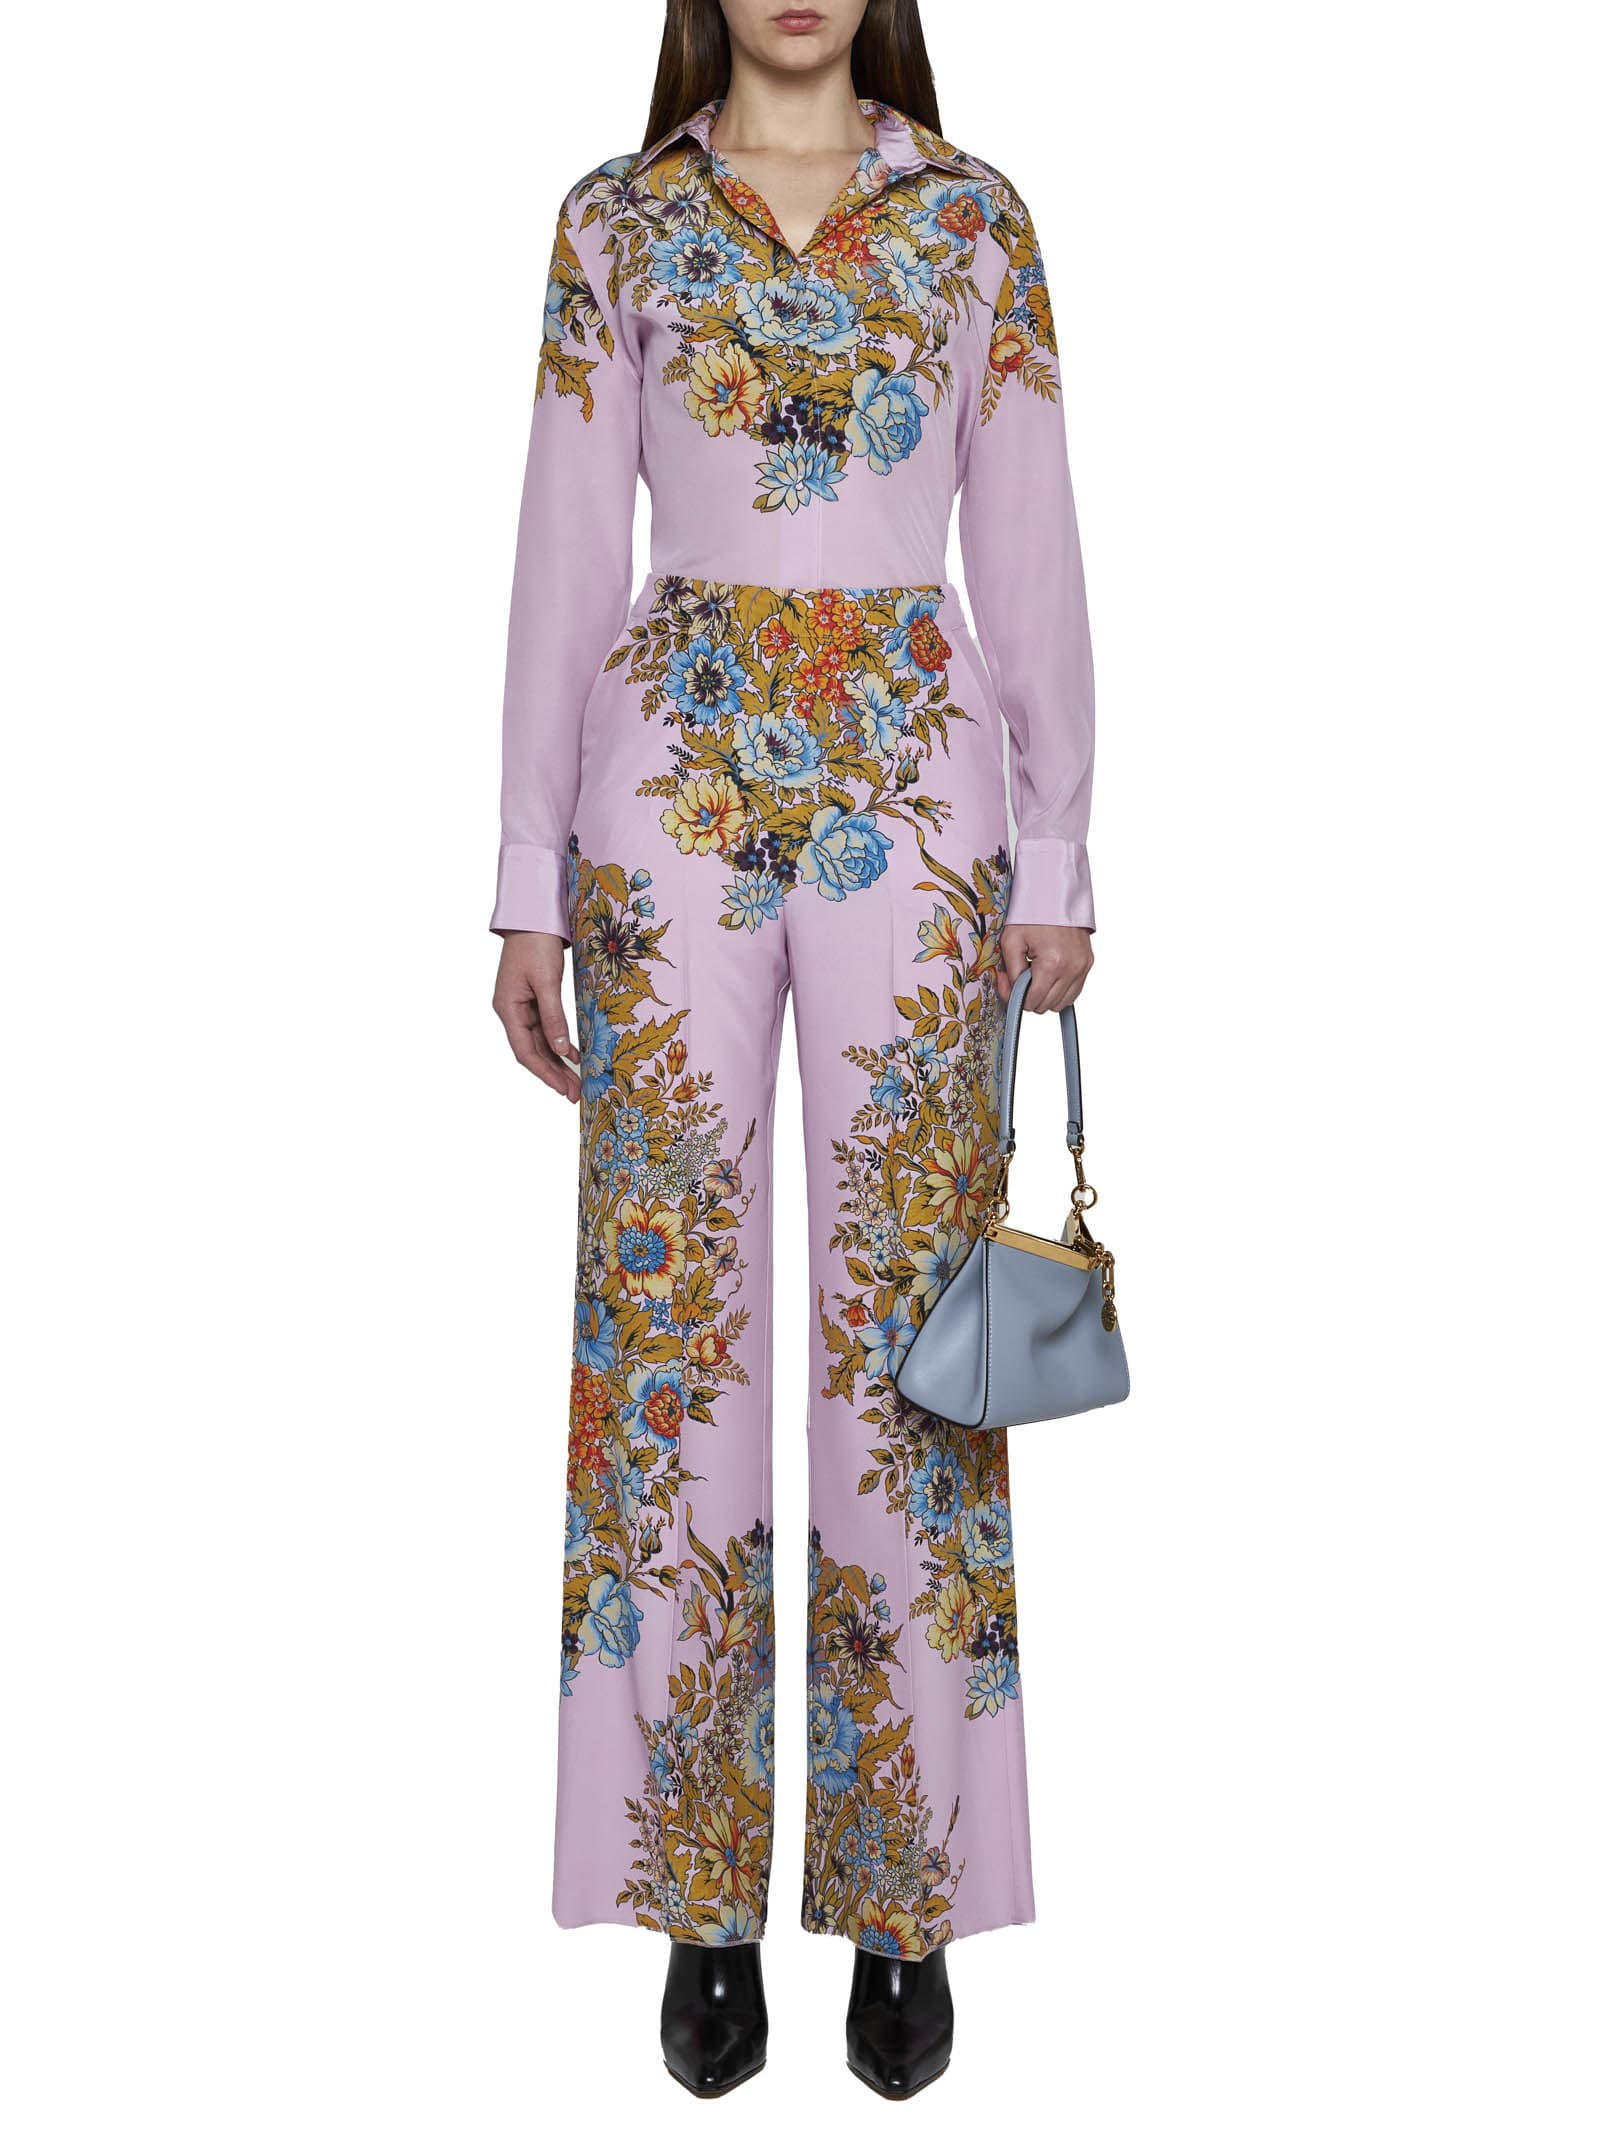 Shop Etro Pants In Stampa F.do Viola